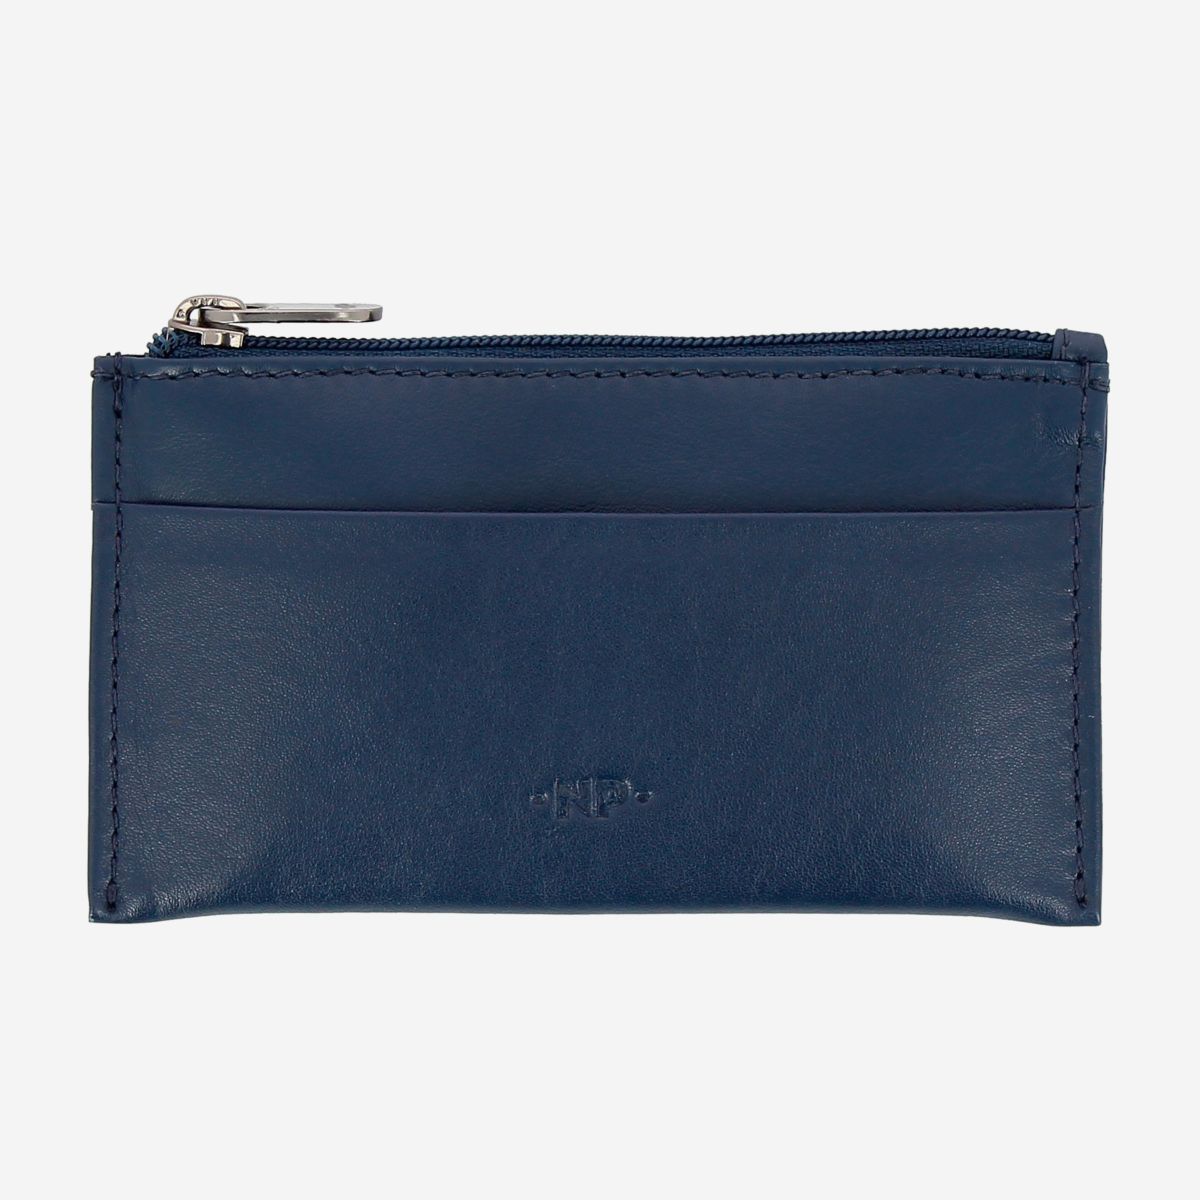 NUVOLA PELLE Leather Coin Purse - Blue